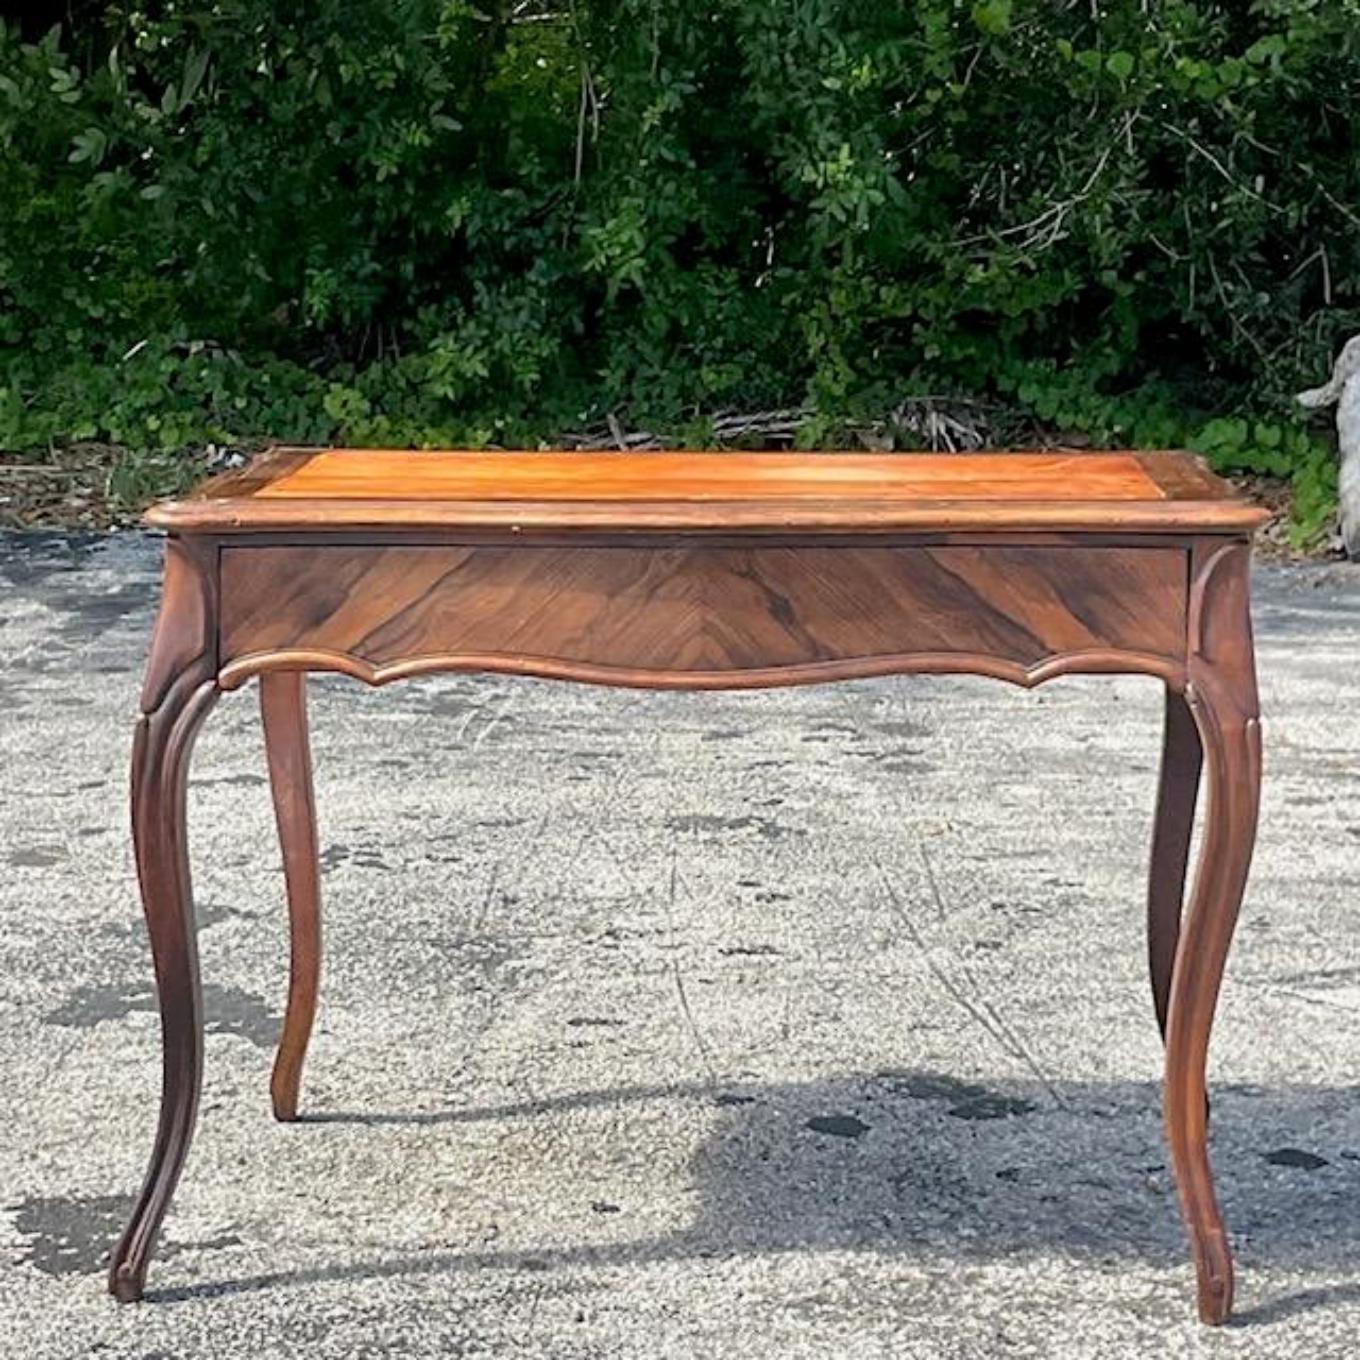 A fabulous vintage Regency writing desk. Beautiful Burl wood frame with carved cabriolet legs. Inset embossed leather top. Acquired from a Palm Beach estate.